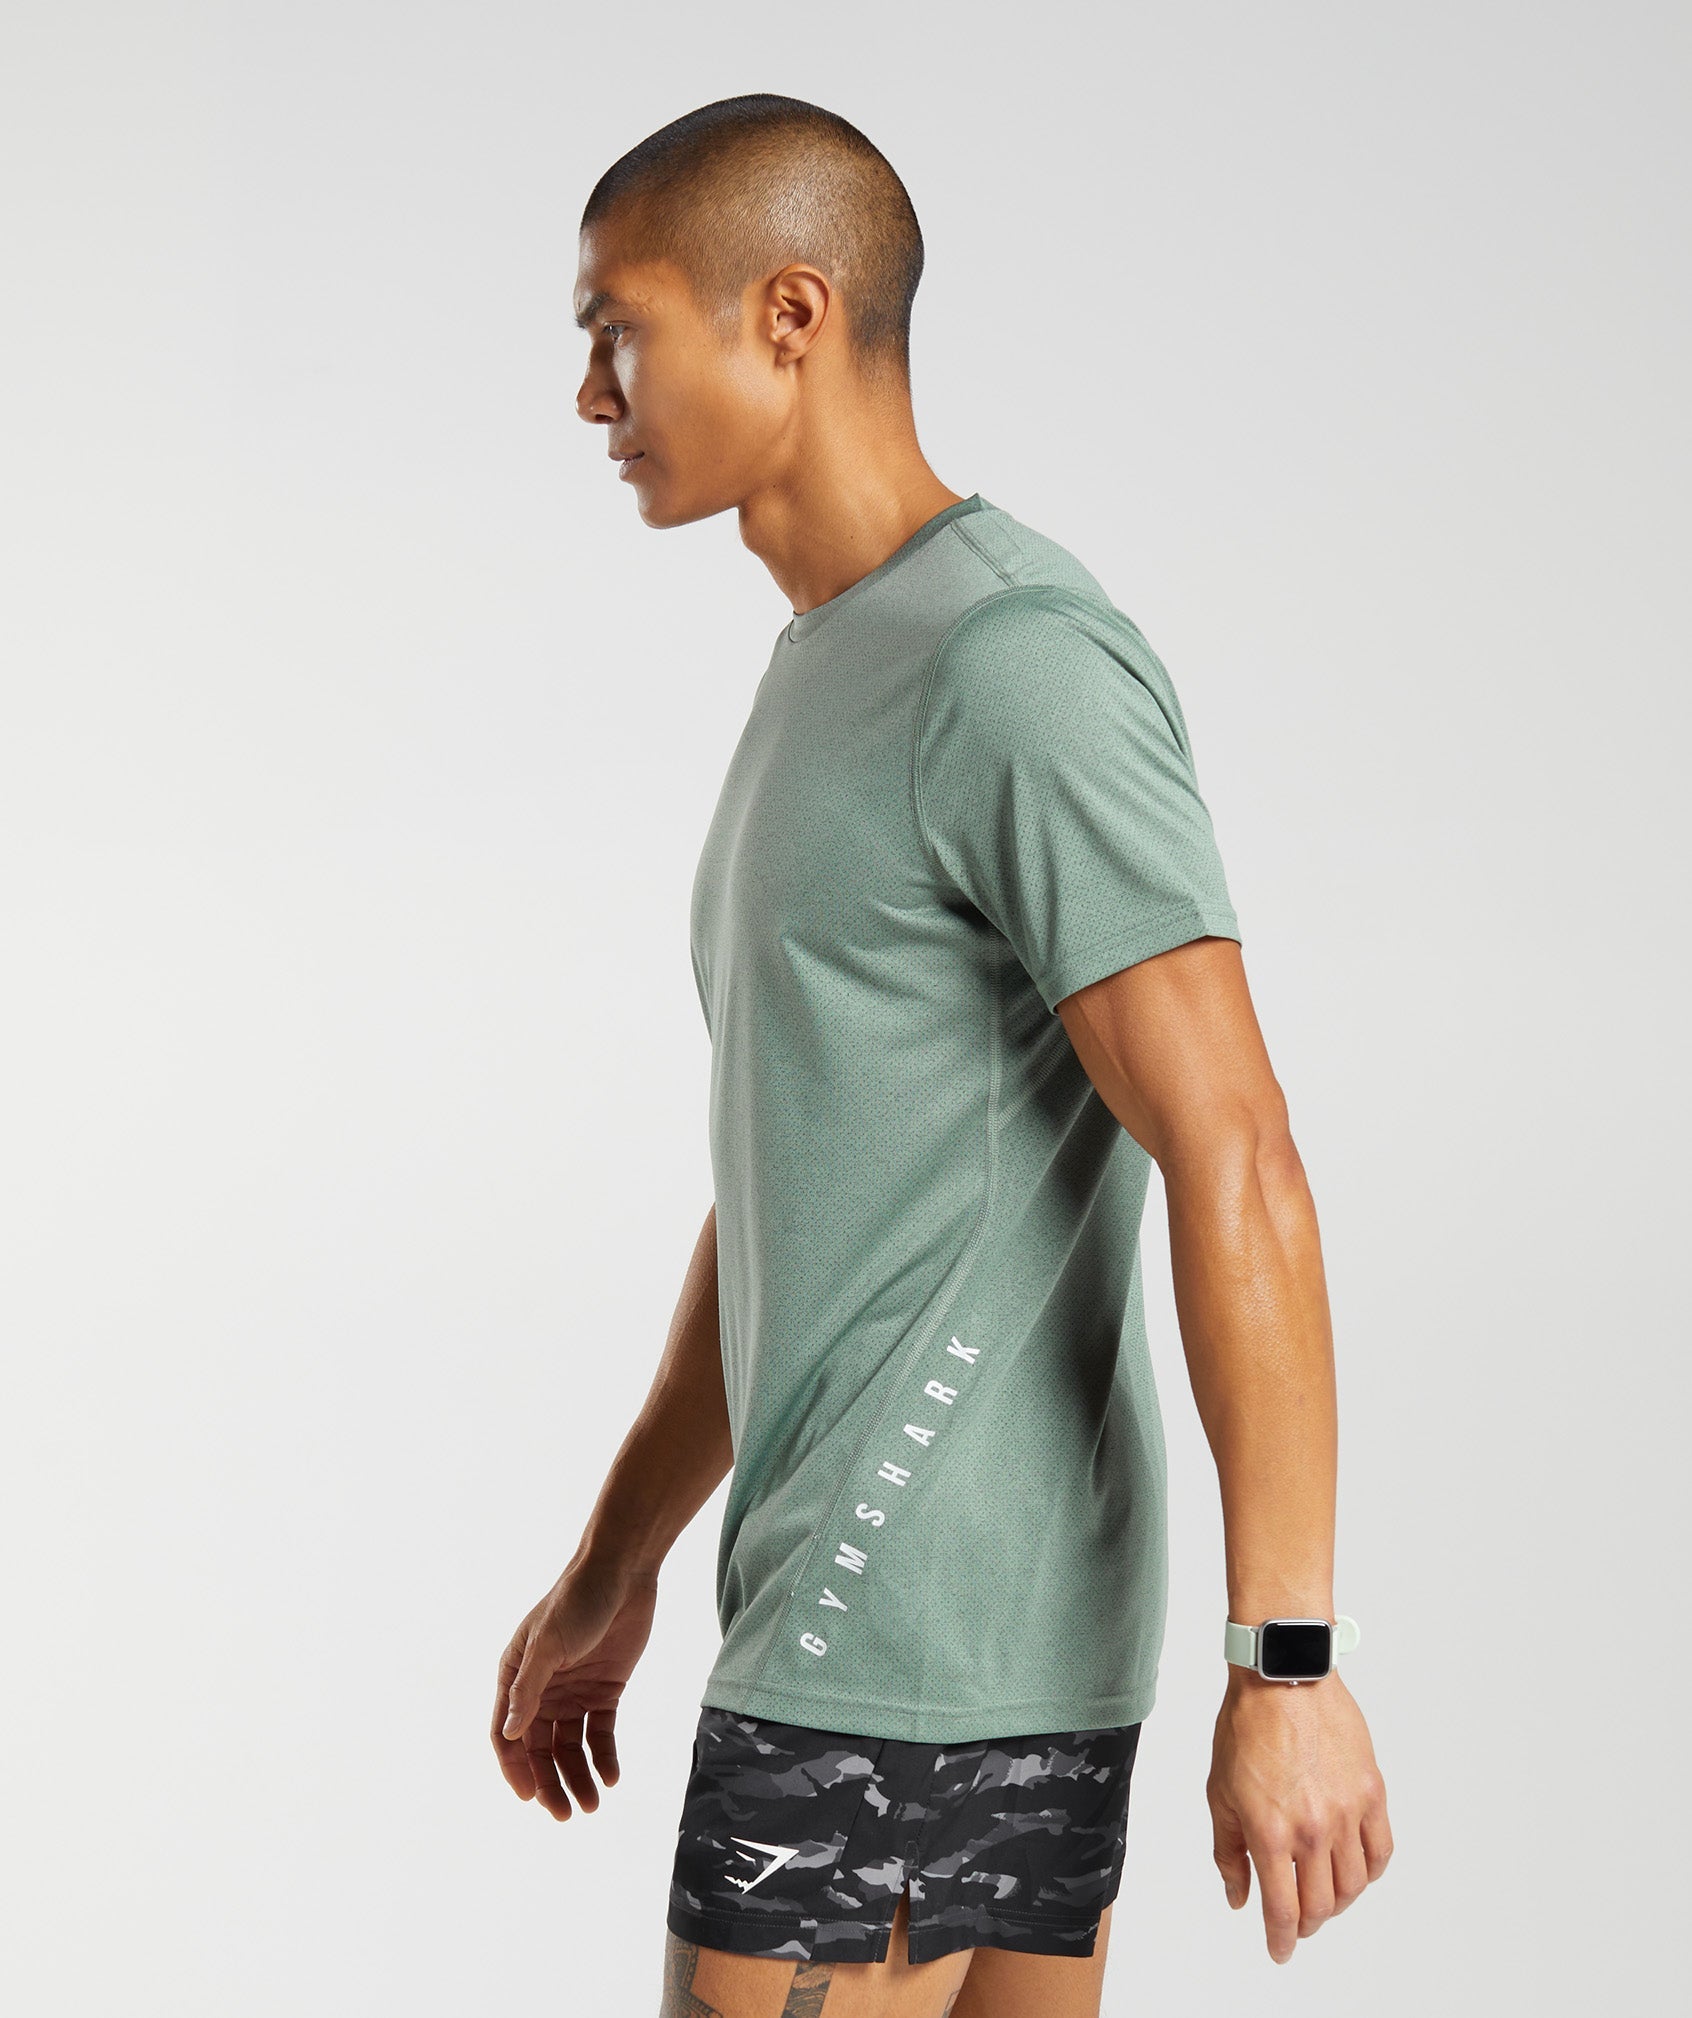 Sport T-Shirt in Willow Green/Black Marl - view 3